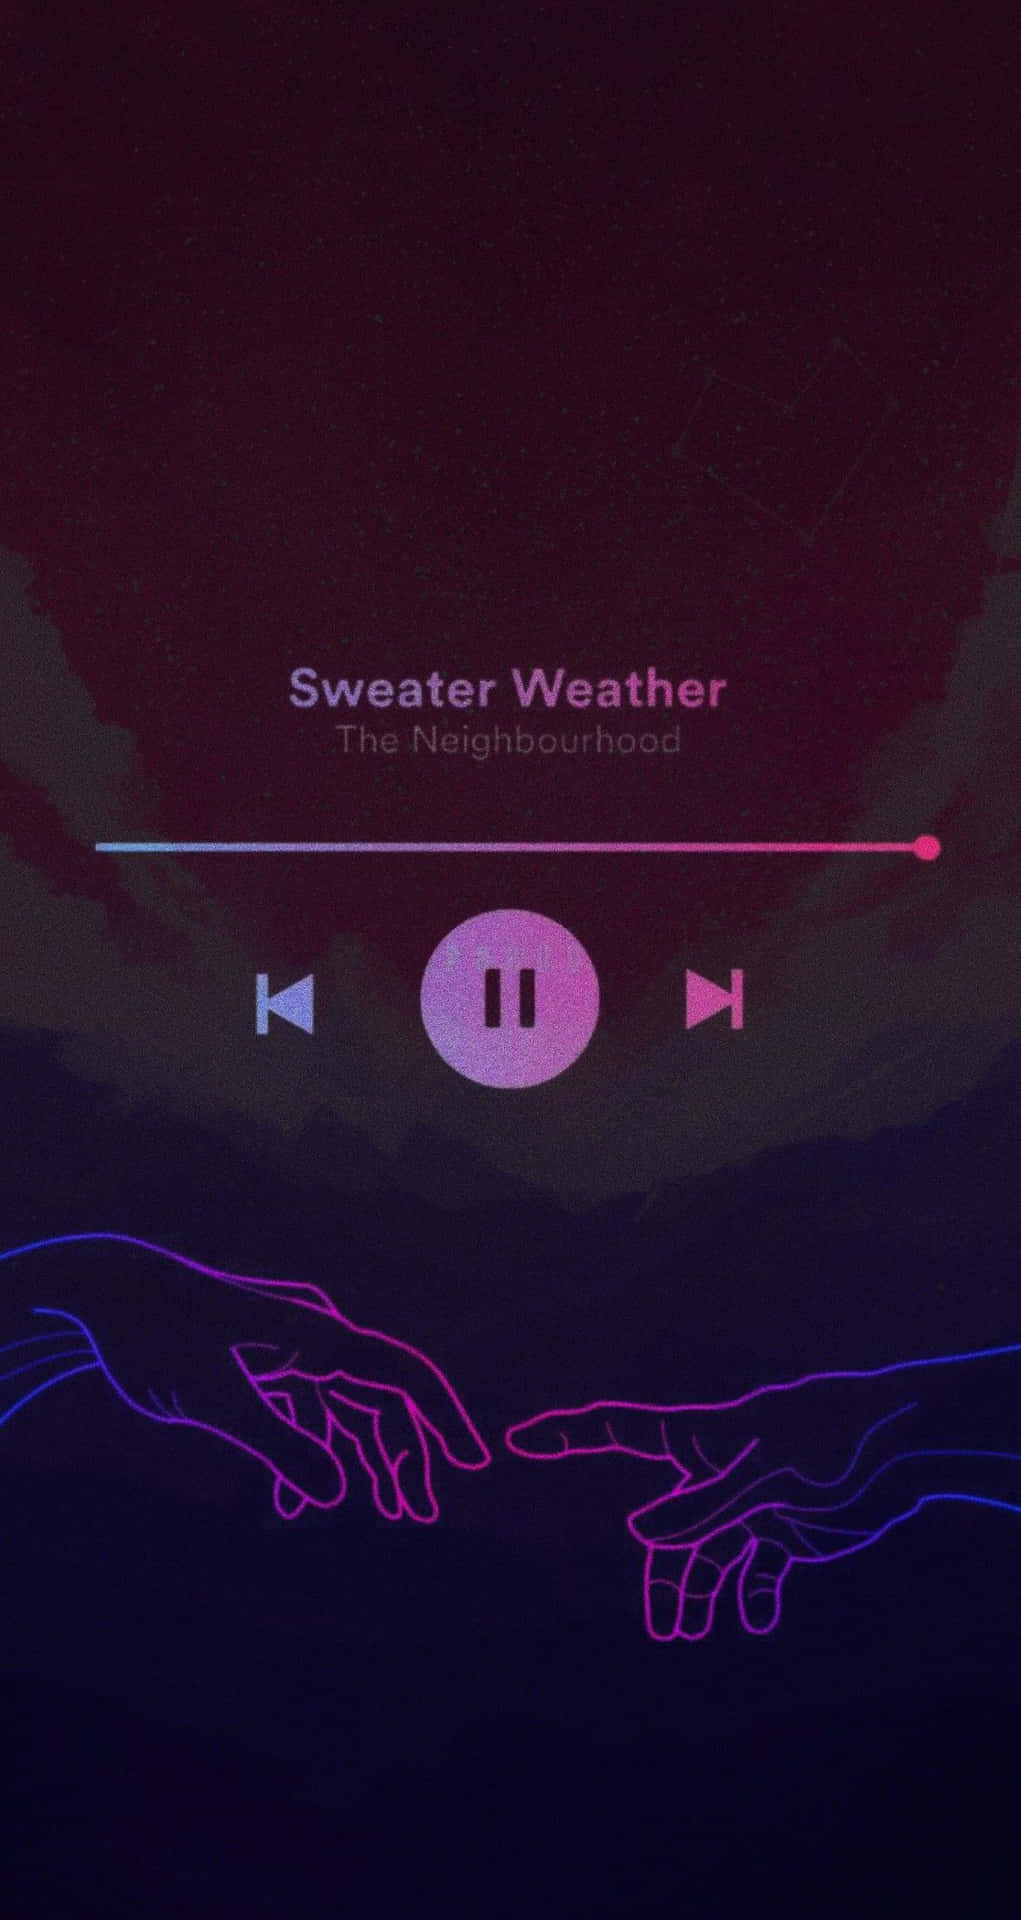 A Picture Of Two Hands With The Words Sweater Weather